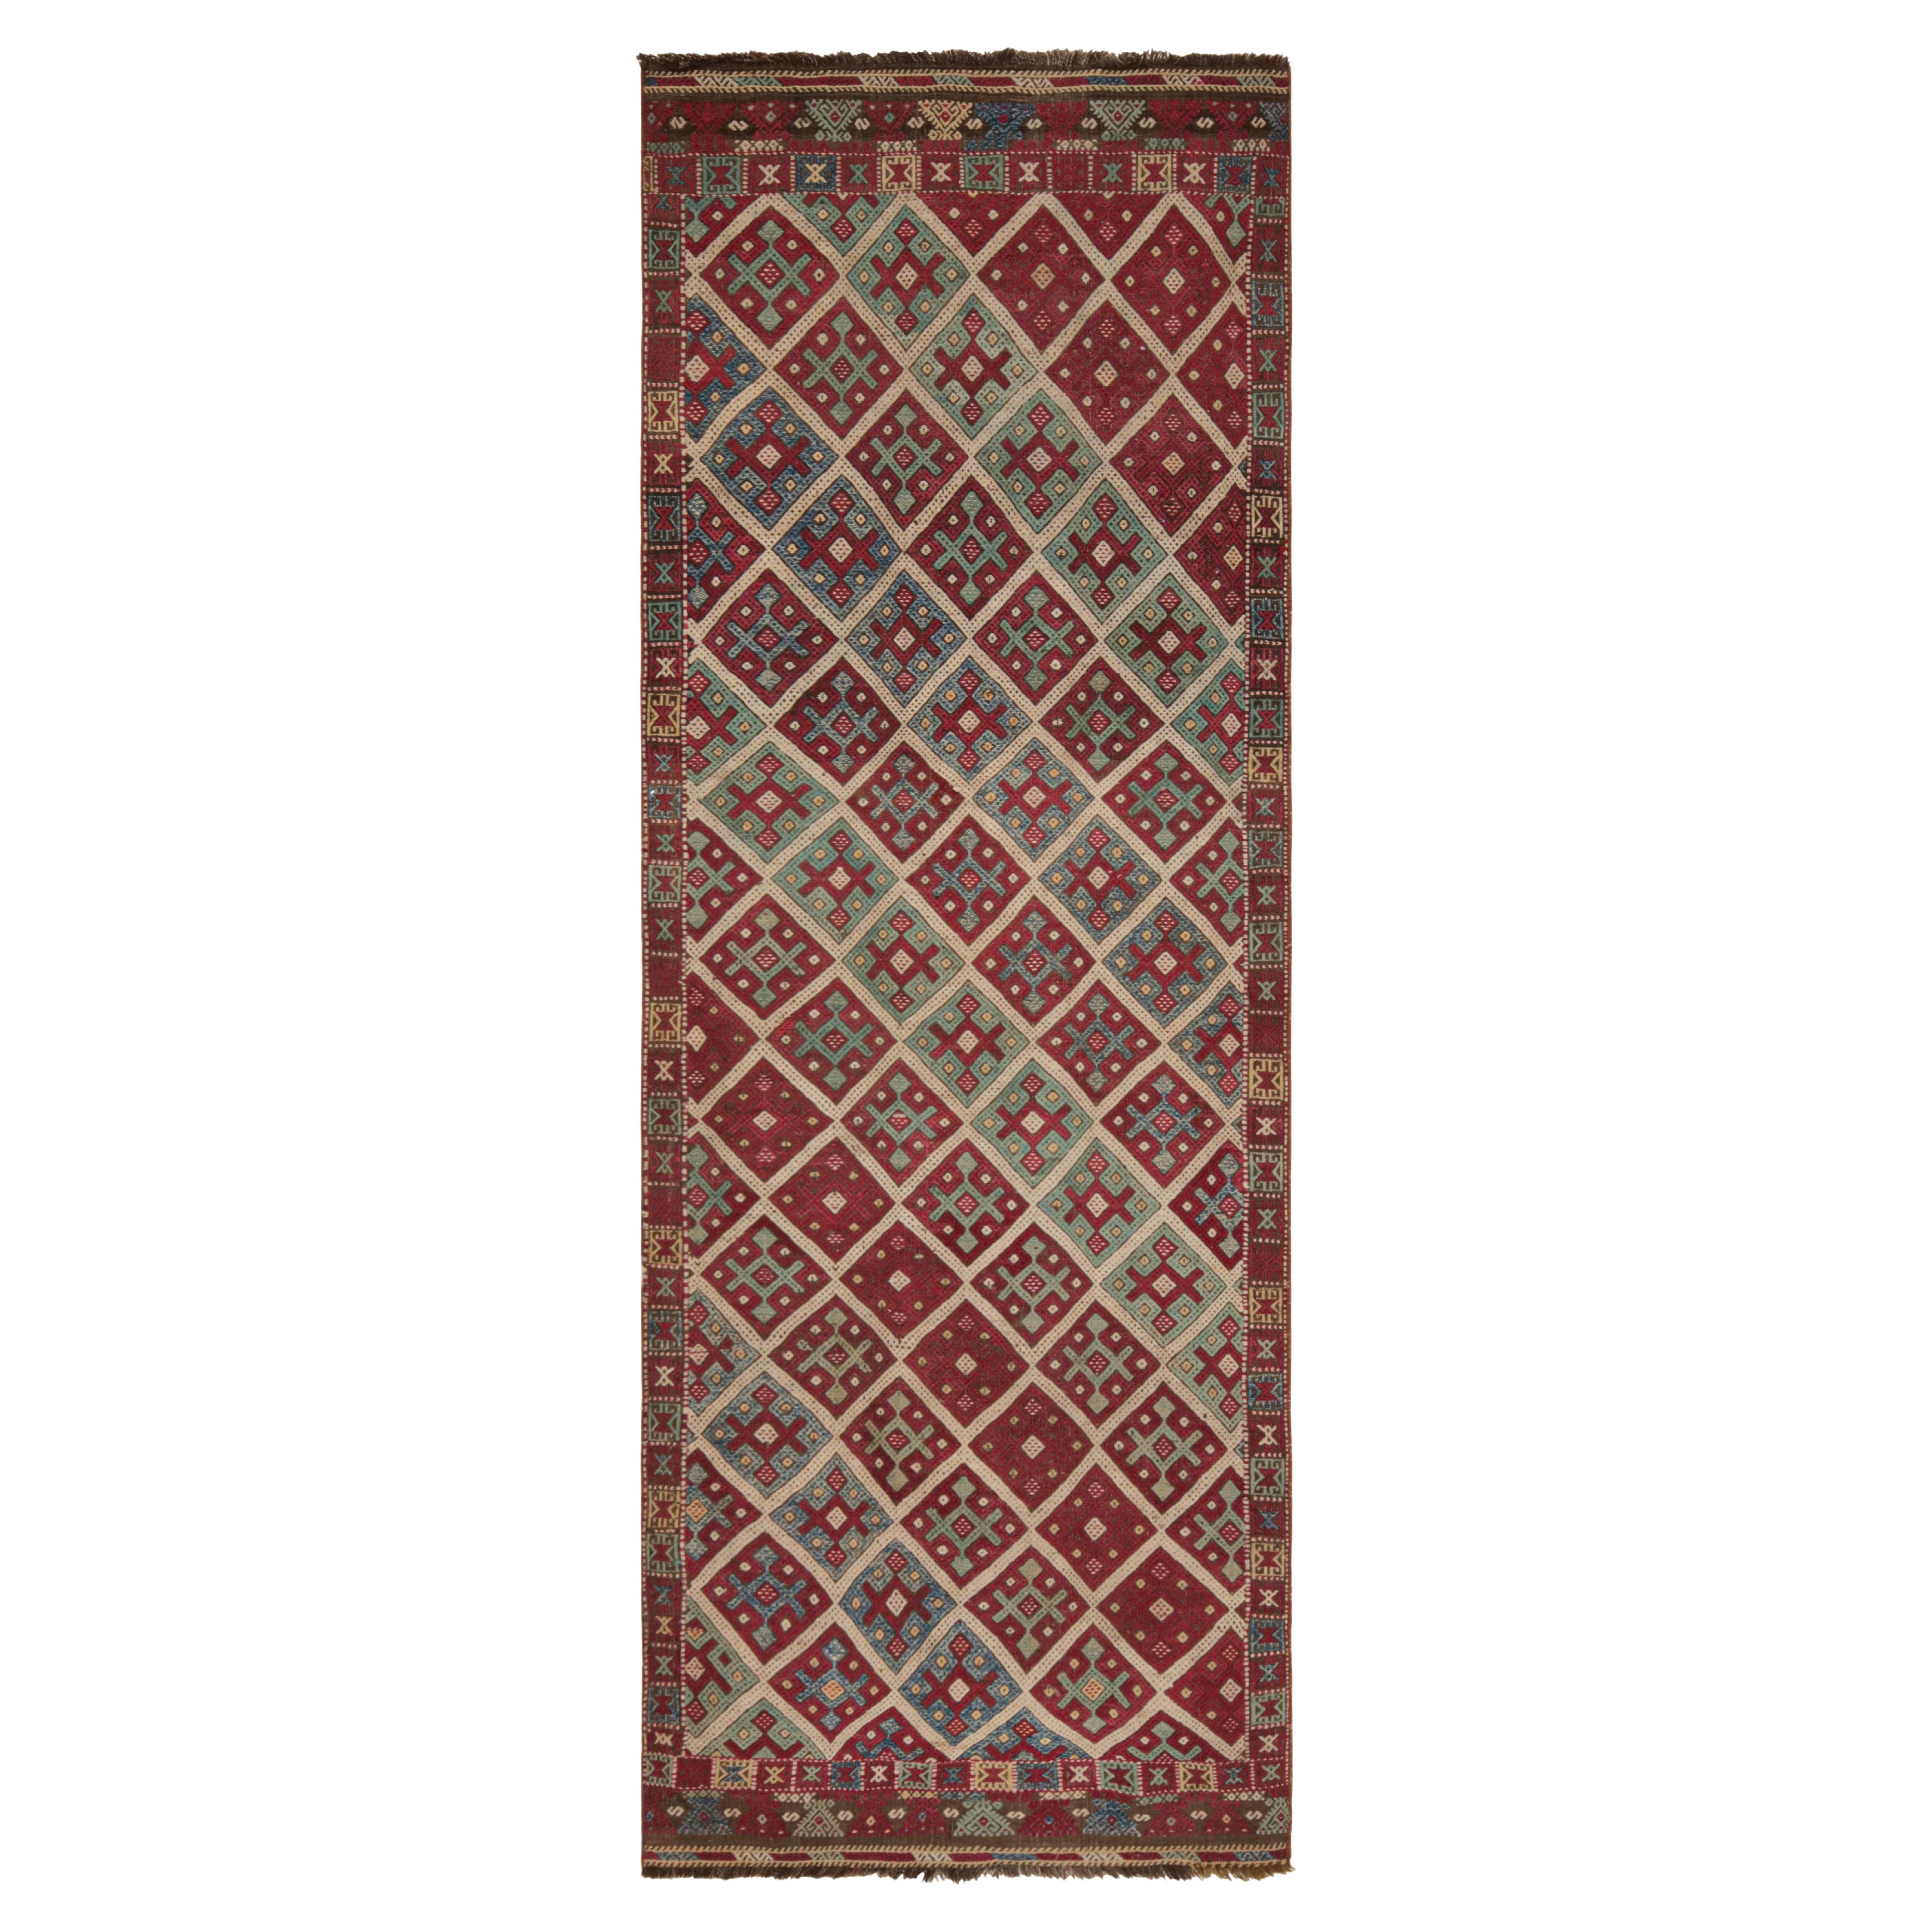 Antique Turkish Transitional Red and Blue Wool Kilim by Rug & Kilim